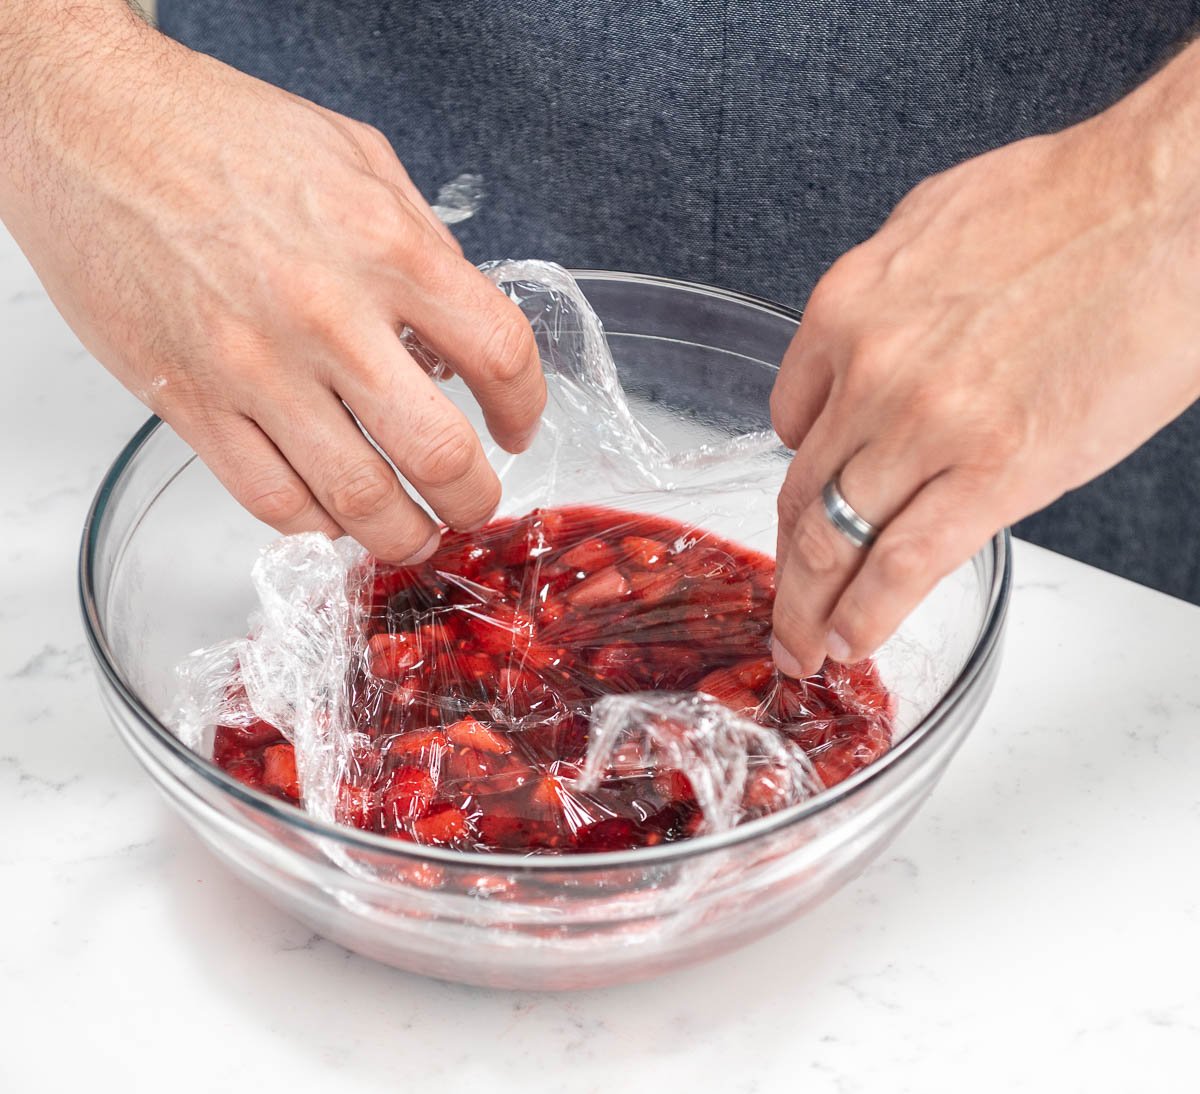 placing plastic wrap on top of berry sauce in bowl